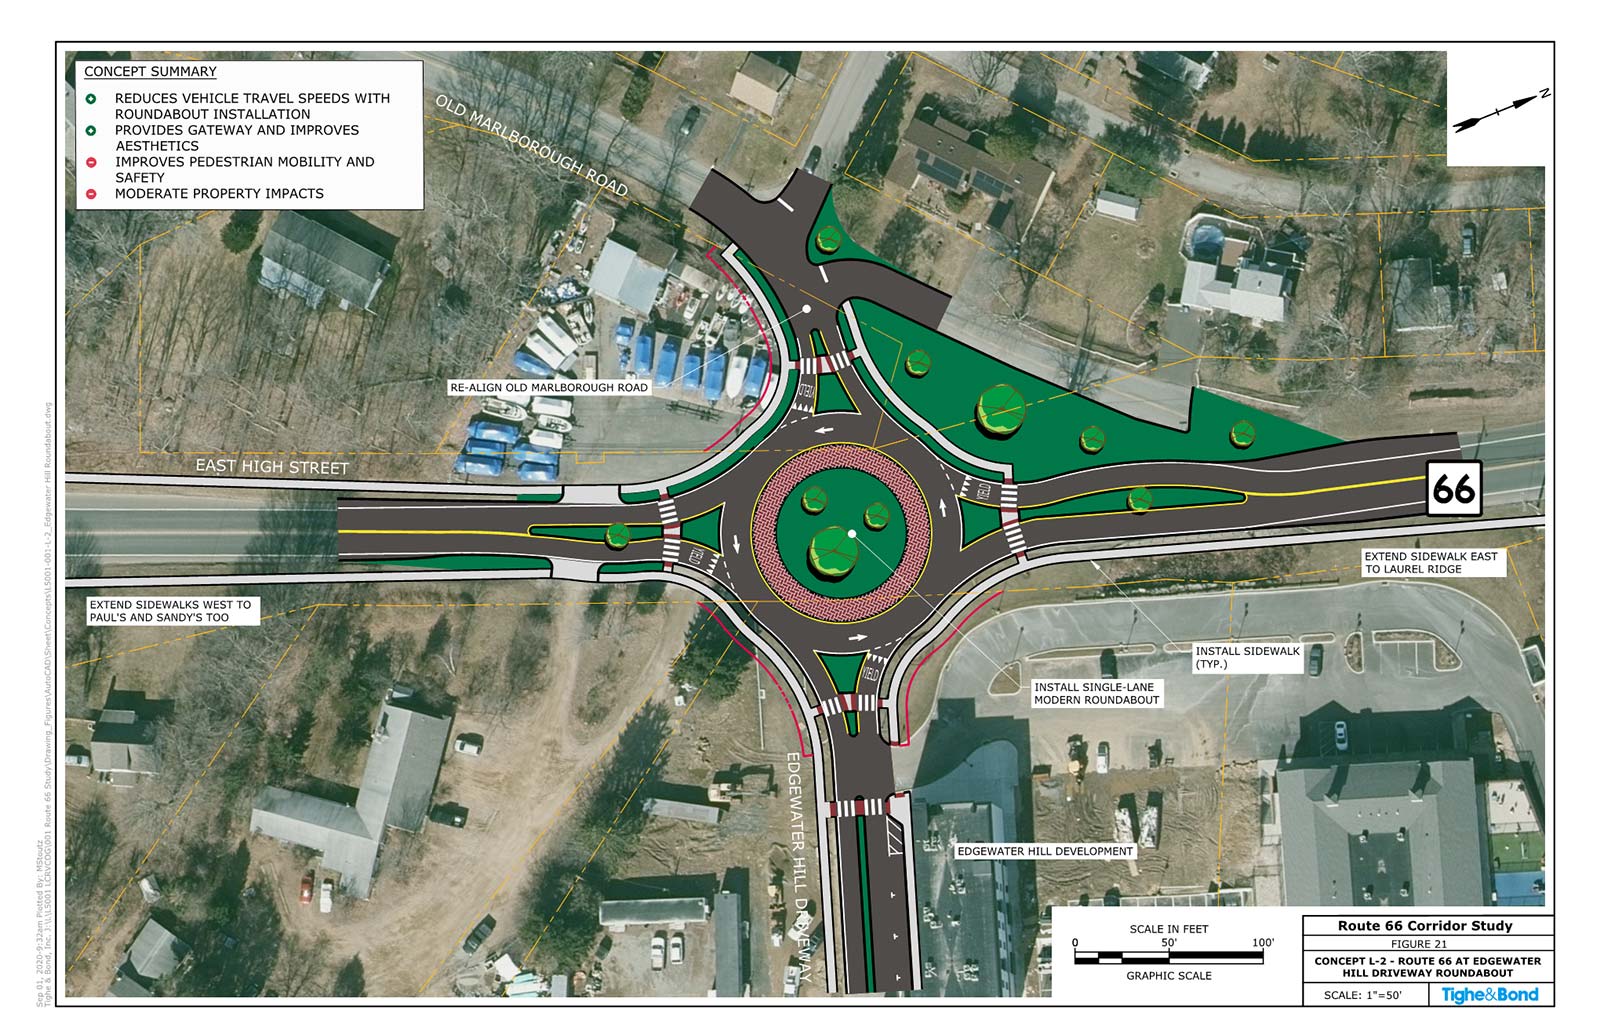 Route 66 at Edgewater Hill Driveway Modern Roundabout (Concept L-2). Route 66 Transportation Study, Portland and East Hampton, CT.